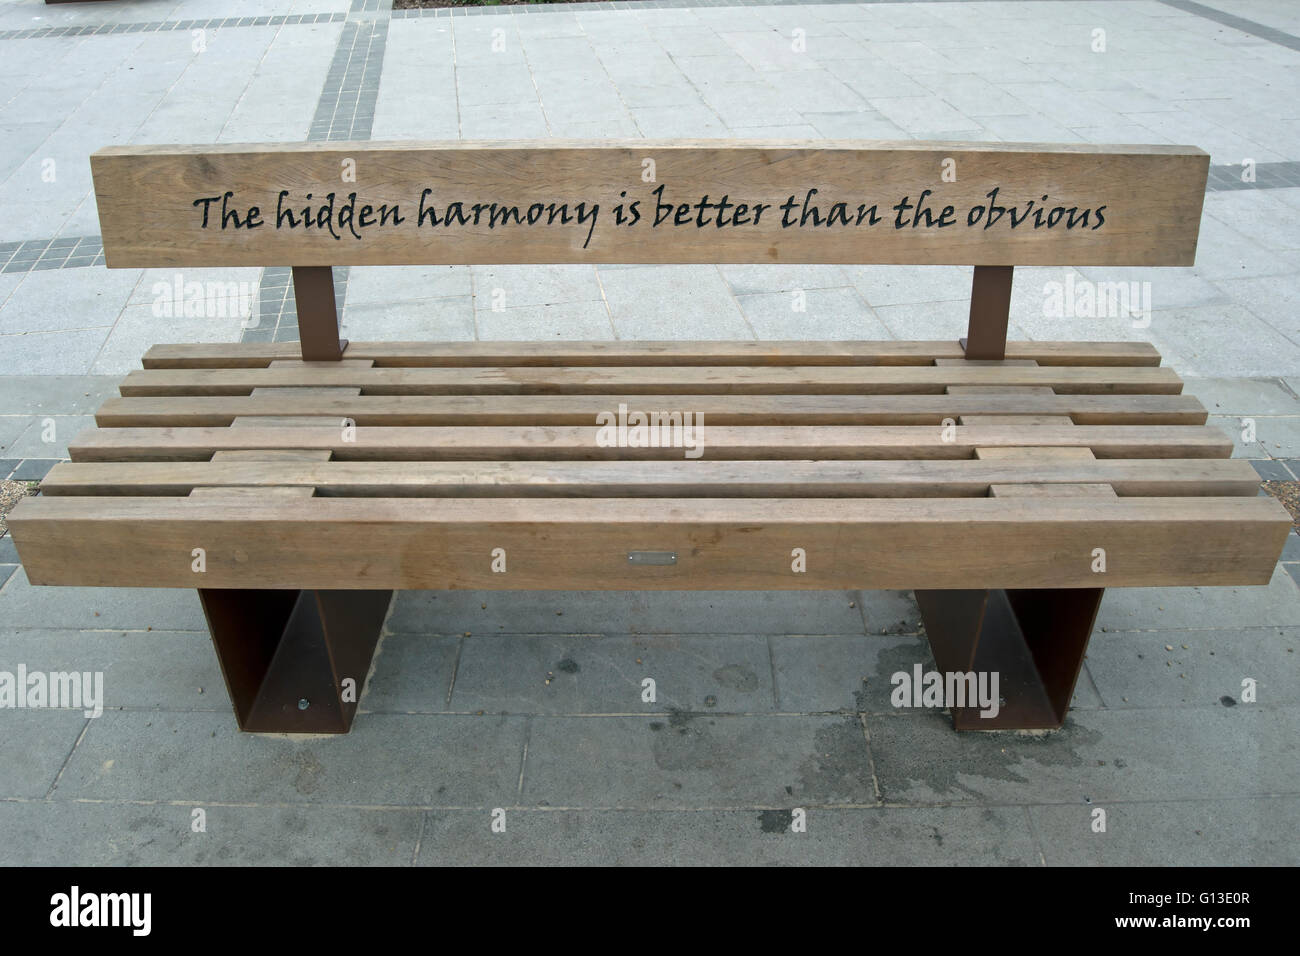 an heraclitus quote on a bench in twickenham, middlesex, england Stock Photo